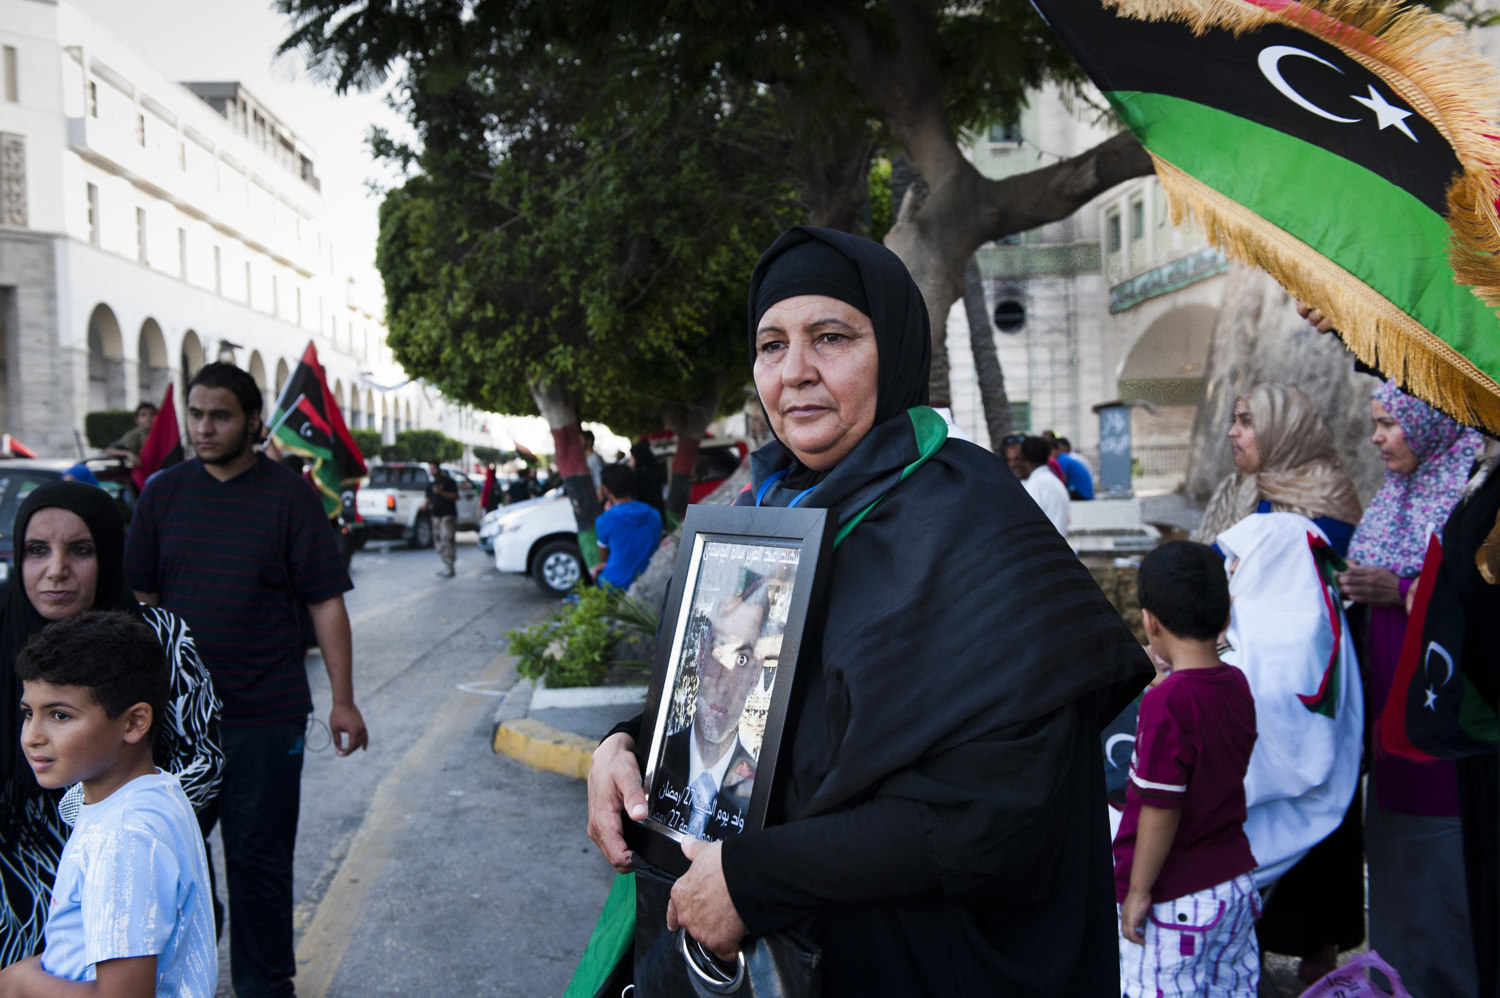  A woman holds a photo of her martyred son in downtown Tripoli as others celebrate the vote. Libyans celebrate after voting.After 42 years of Muammar Gaddafi's reign, Libyans are participating in the first democratic election since 1969. 

 